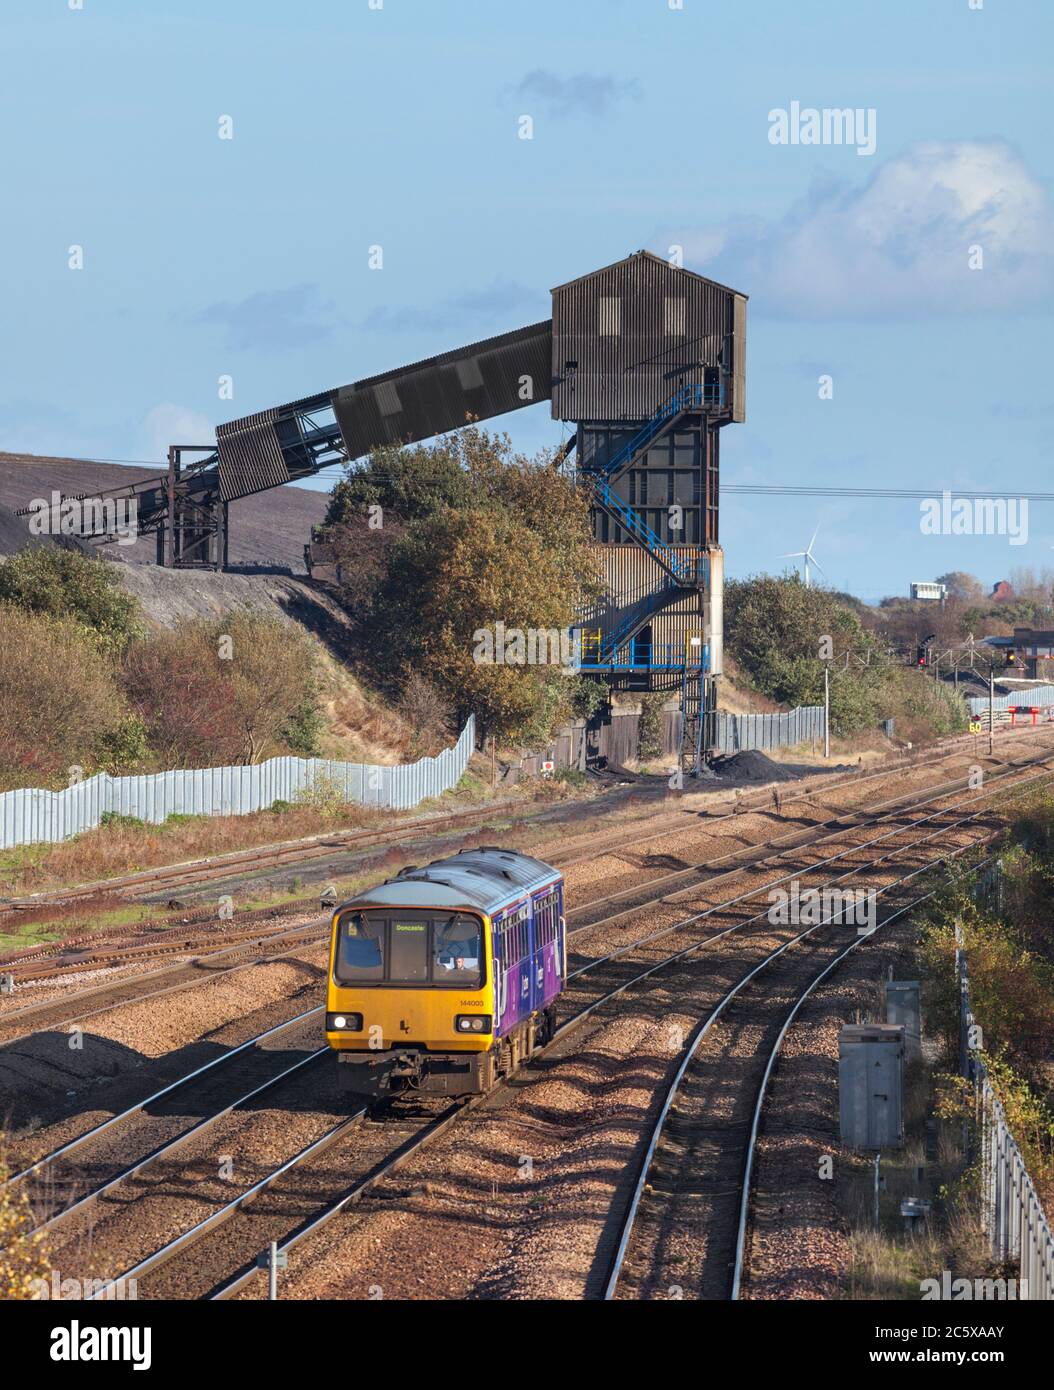 Northern Rail class 144 pacer train 144003 passing the closed Hatfield colliery, Yorkshire, UK Stock Photo